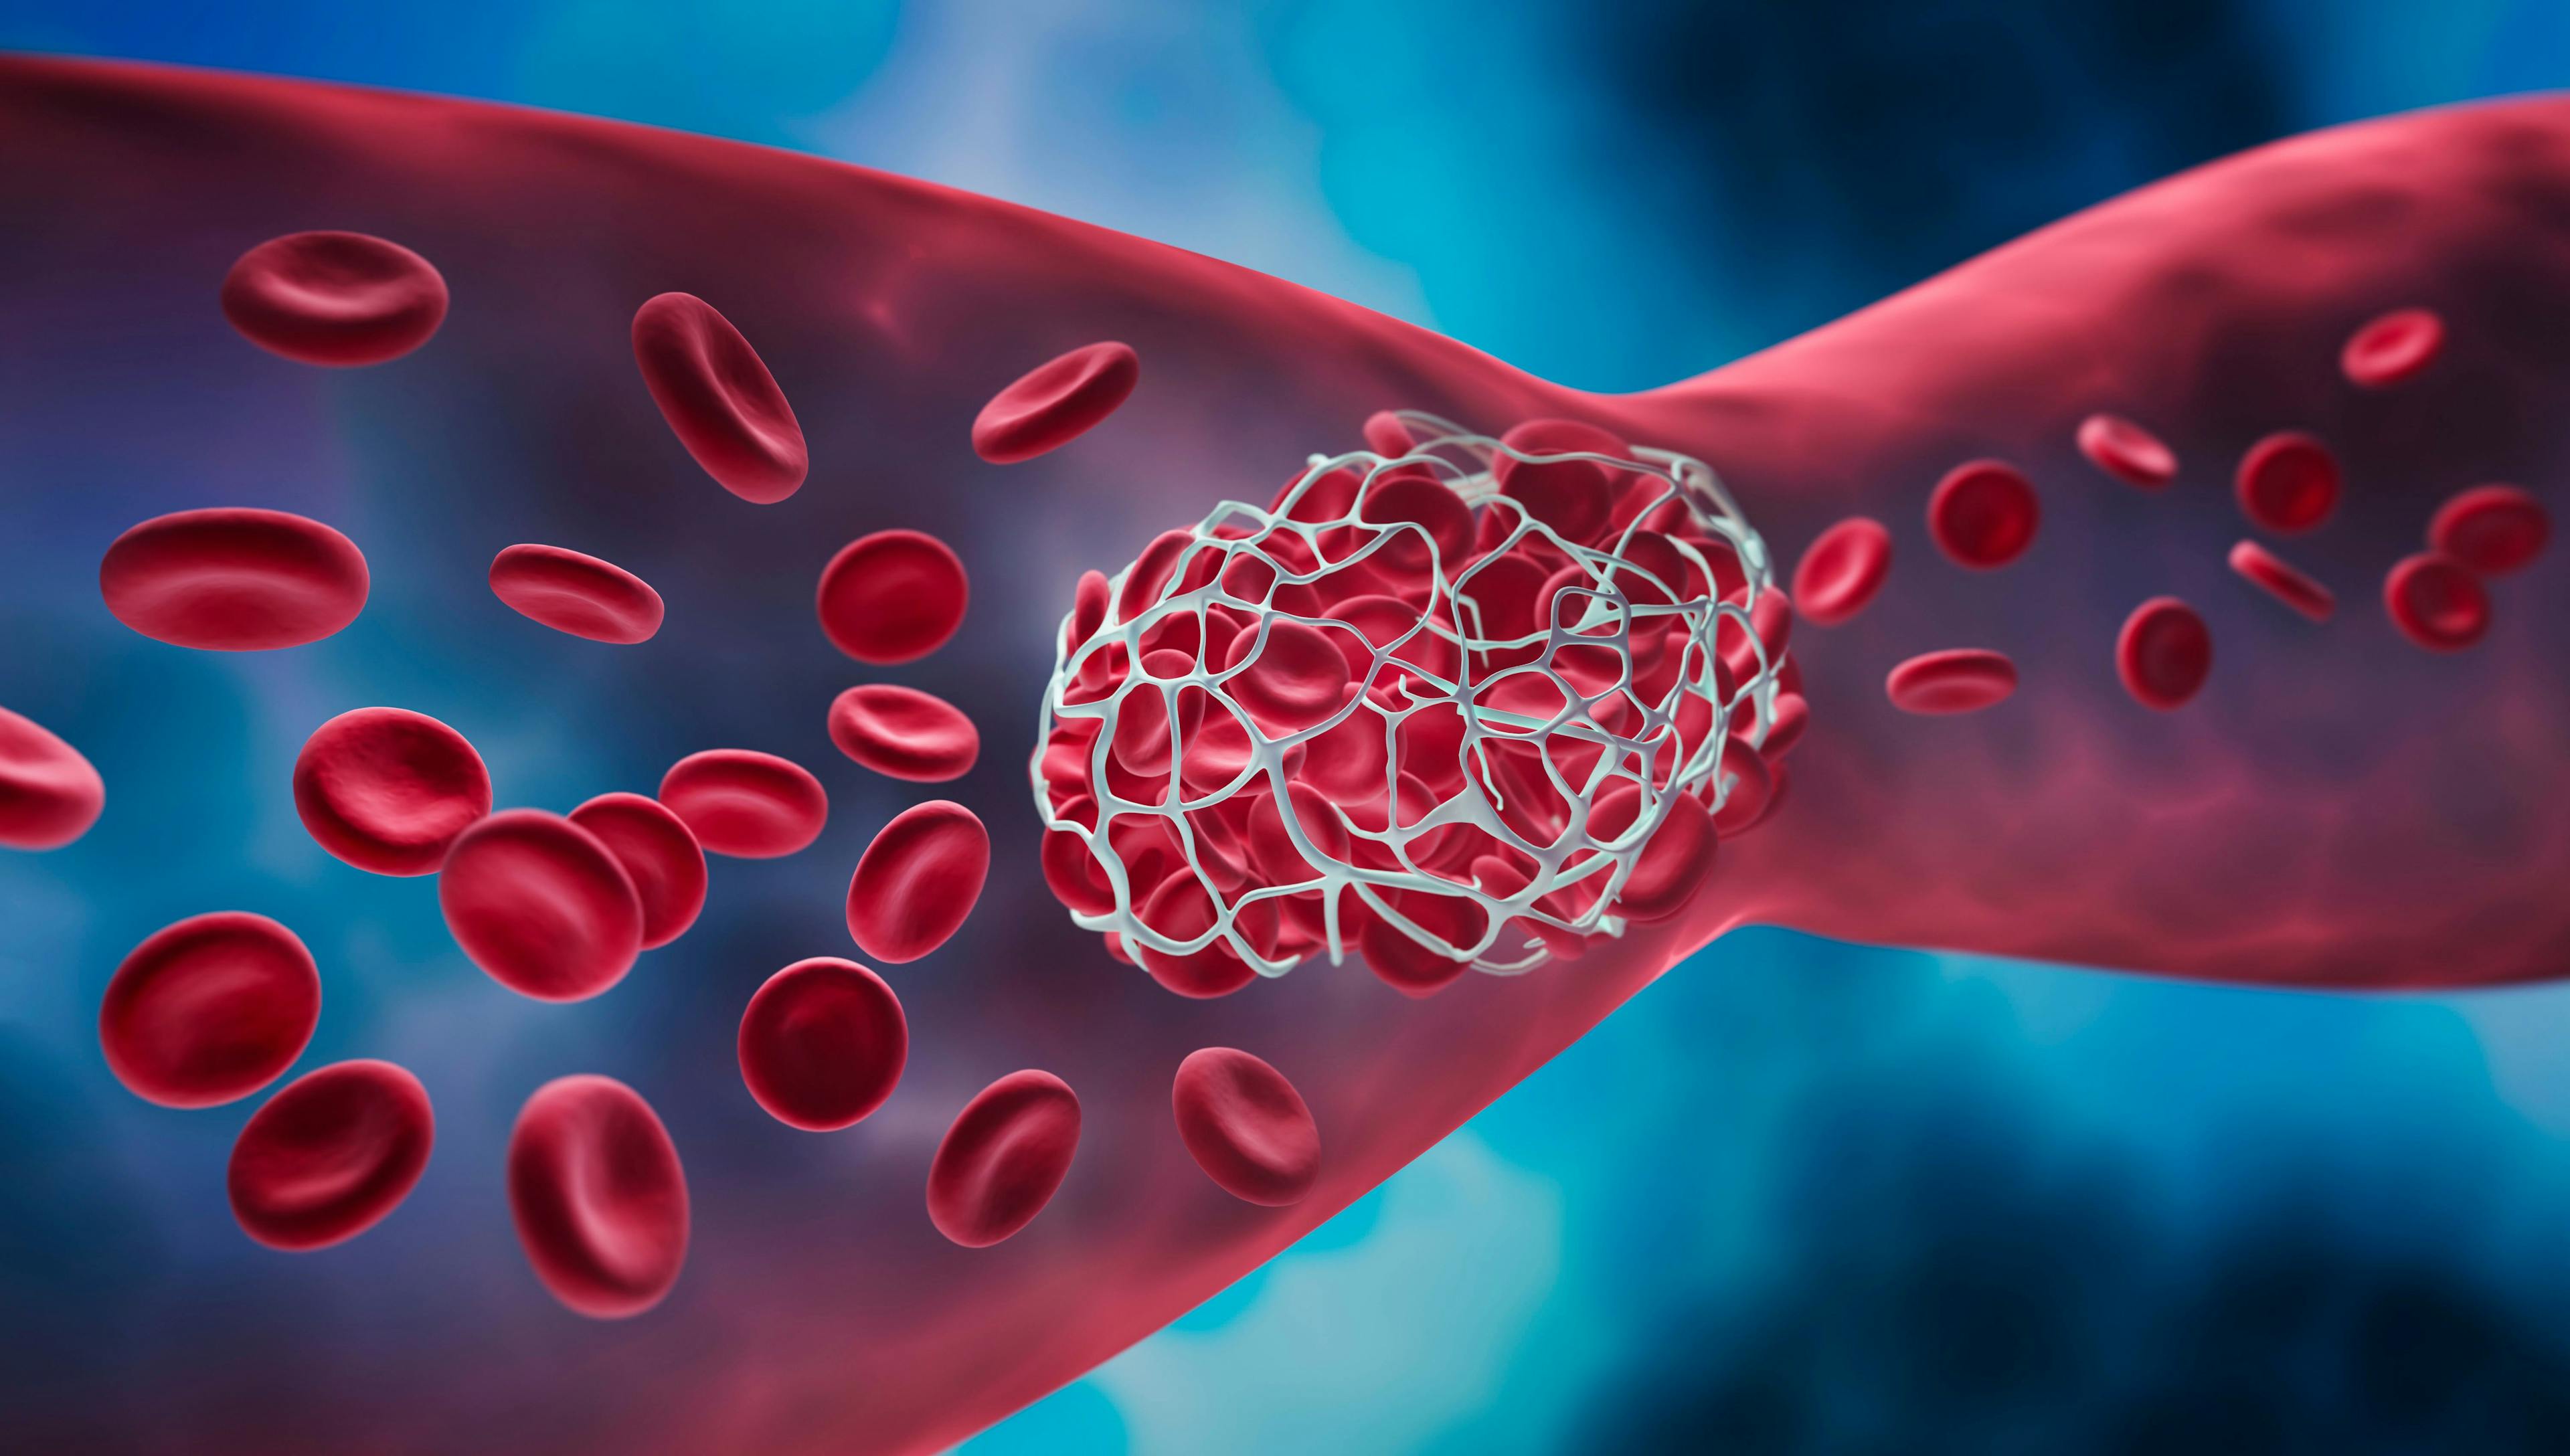 Study Identifies Risk Factors for Thromboembolic Events in Patients With PNH